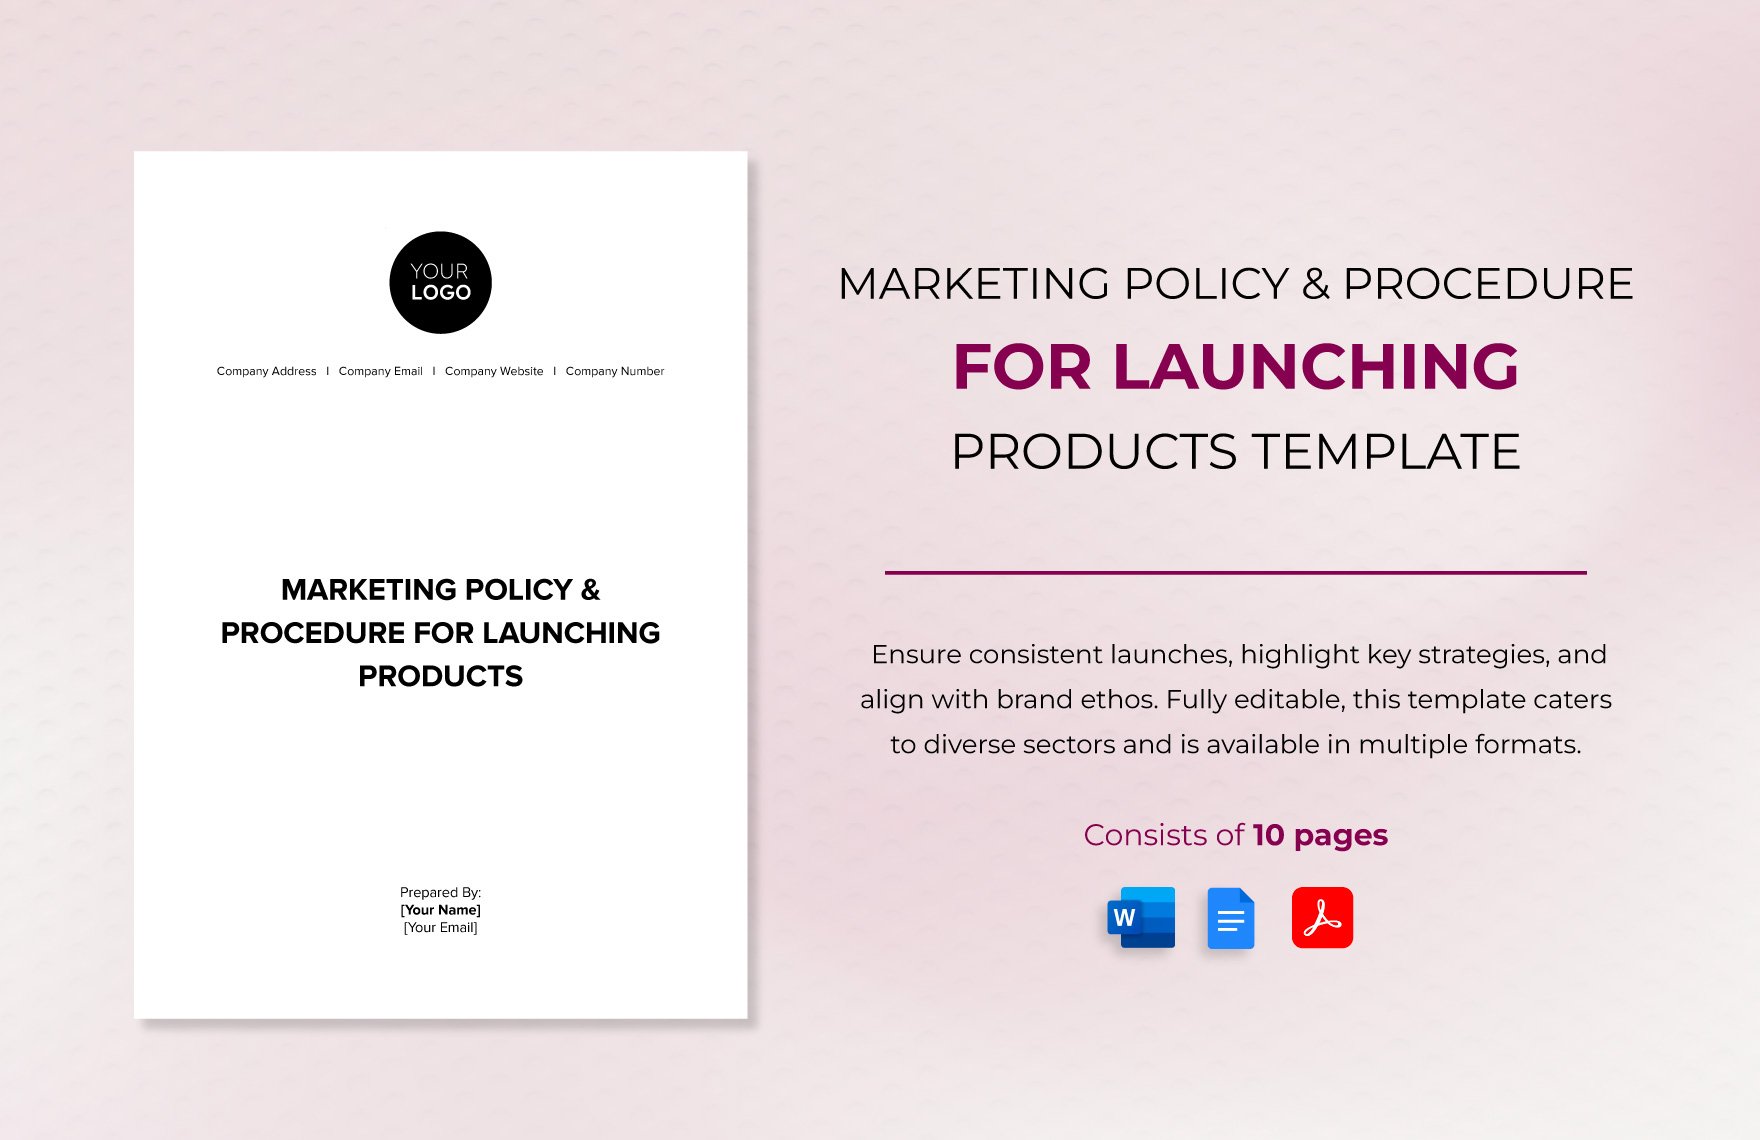 Marketing Policy & Procedure for Launching Products Template